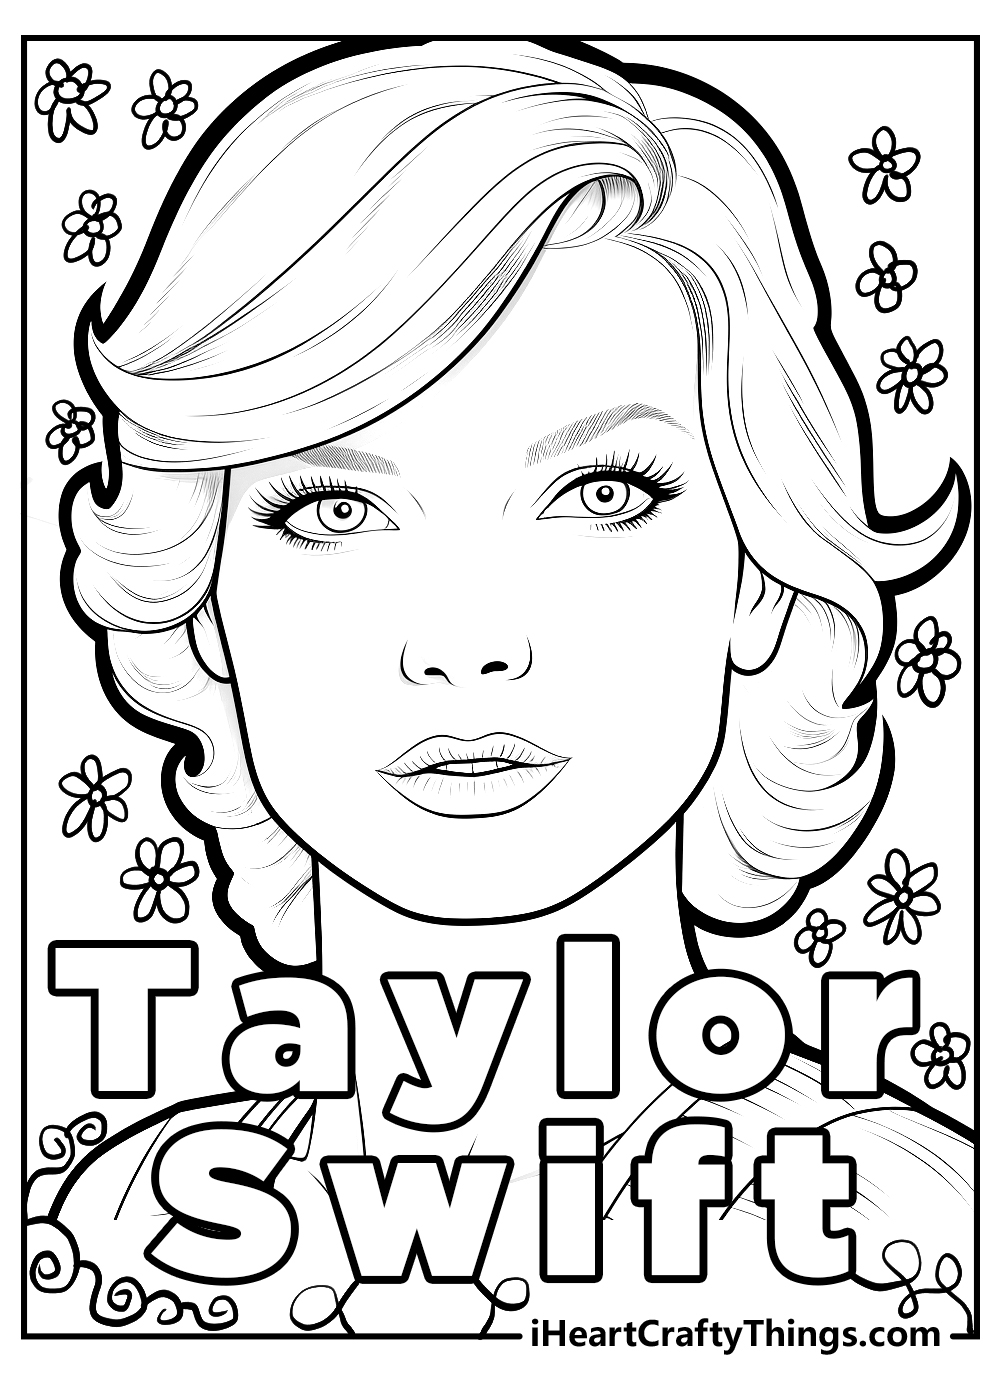 taylor swift head coloring pages